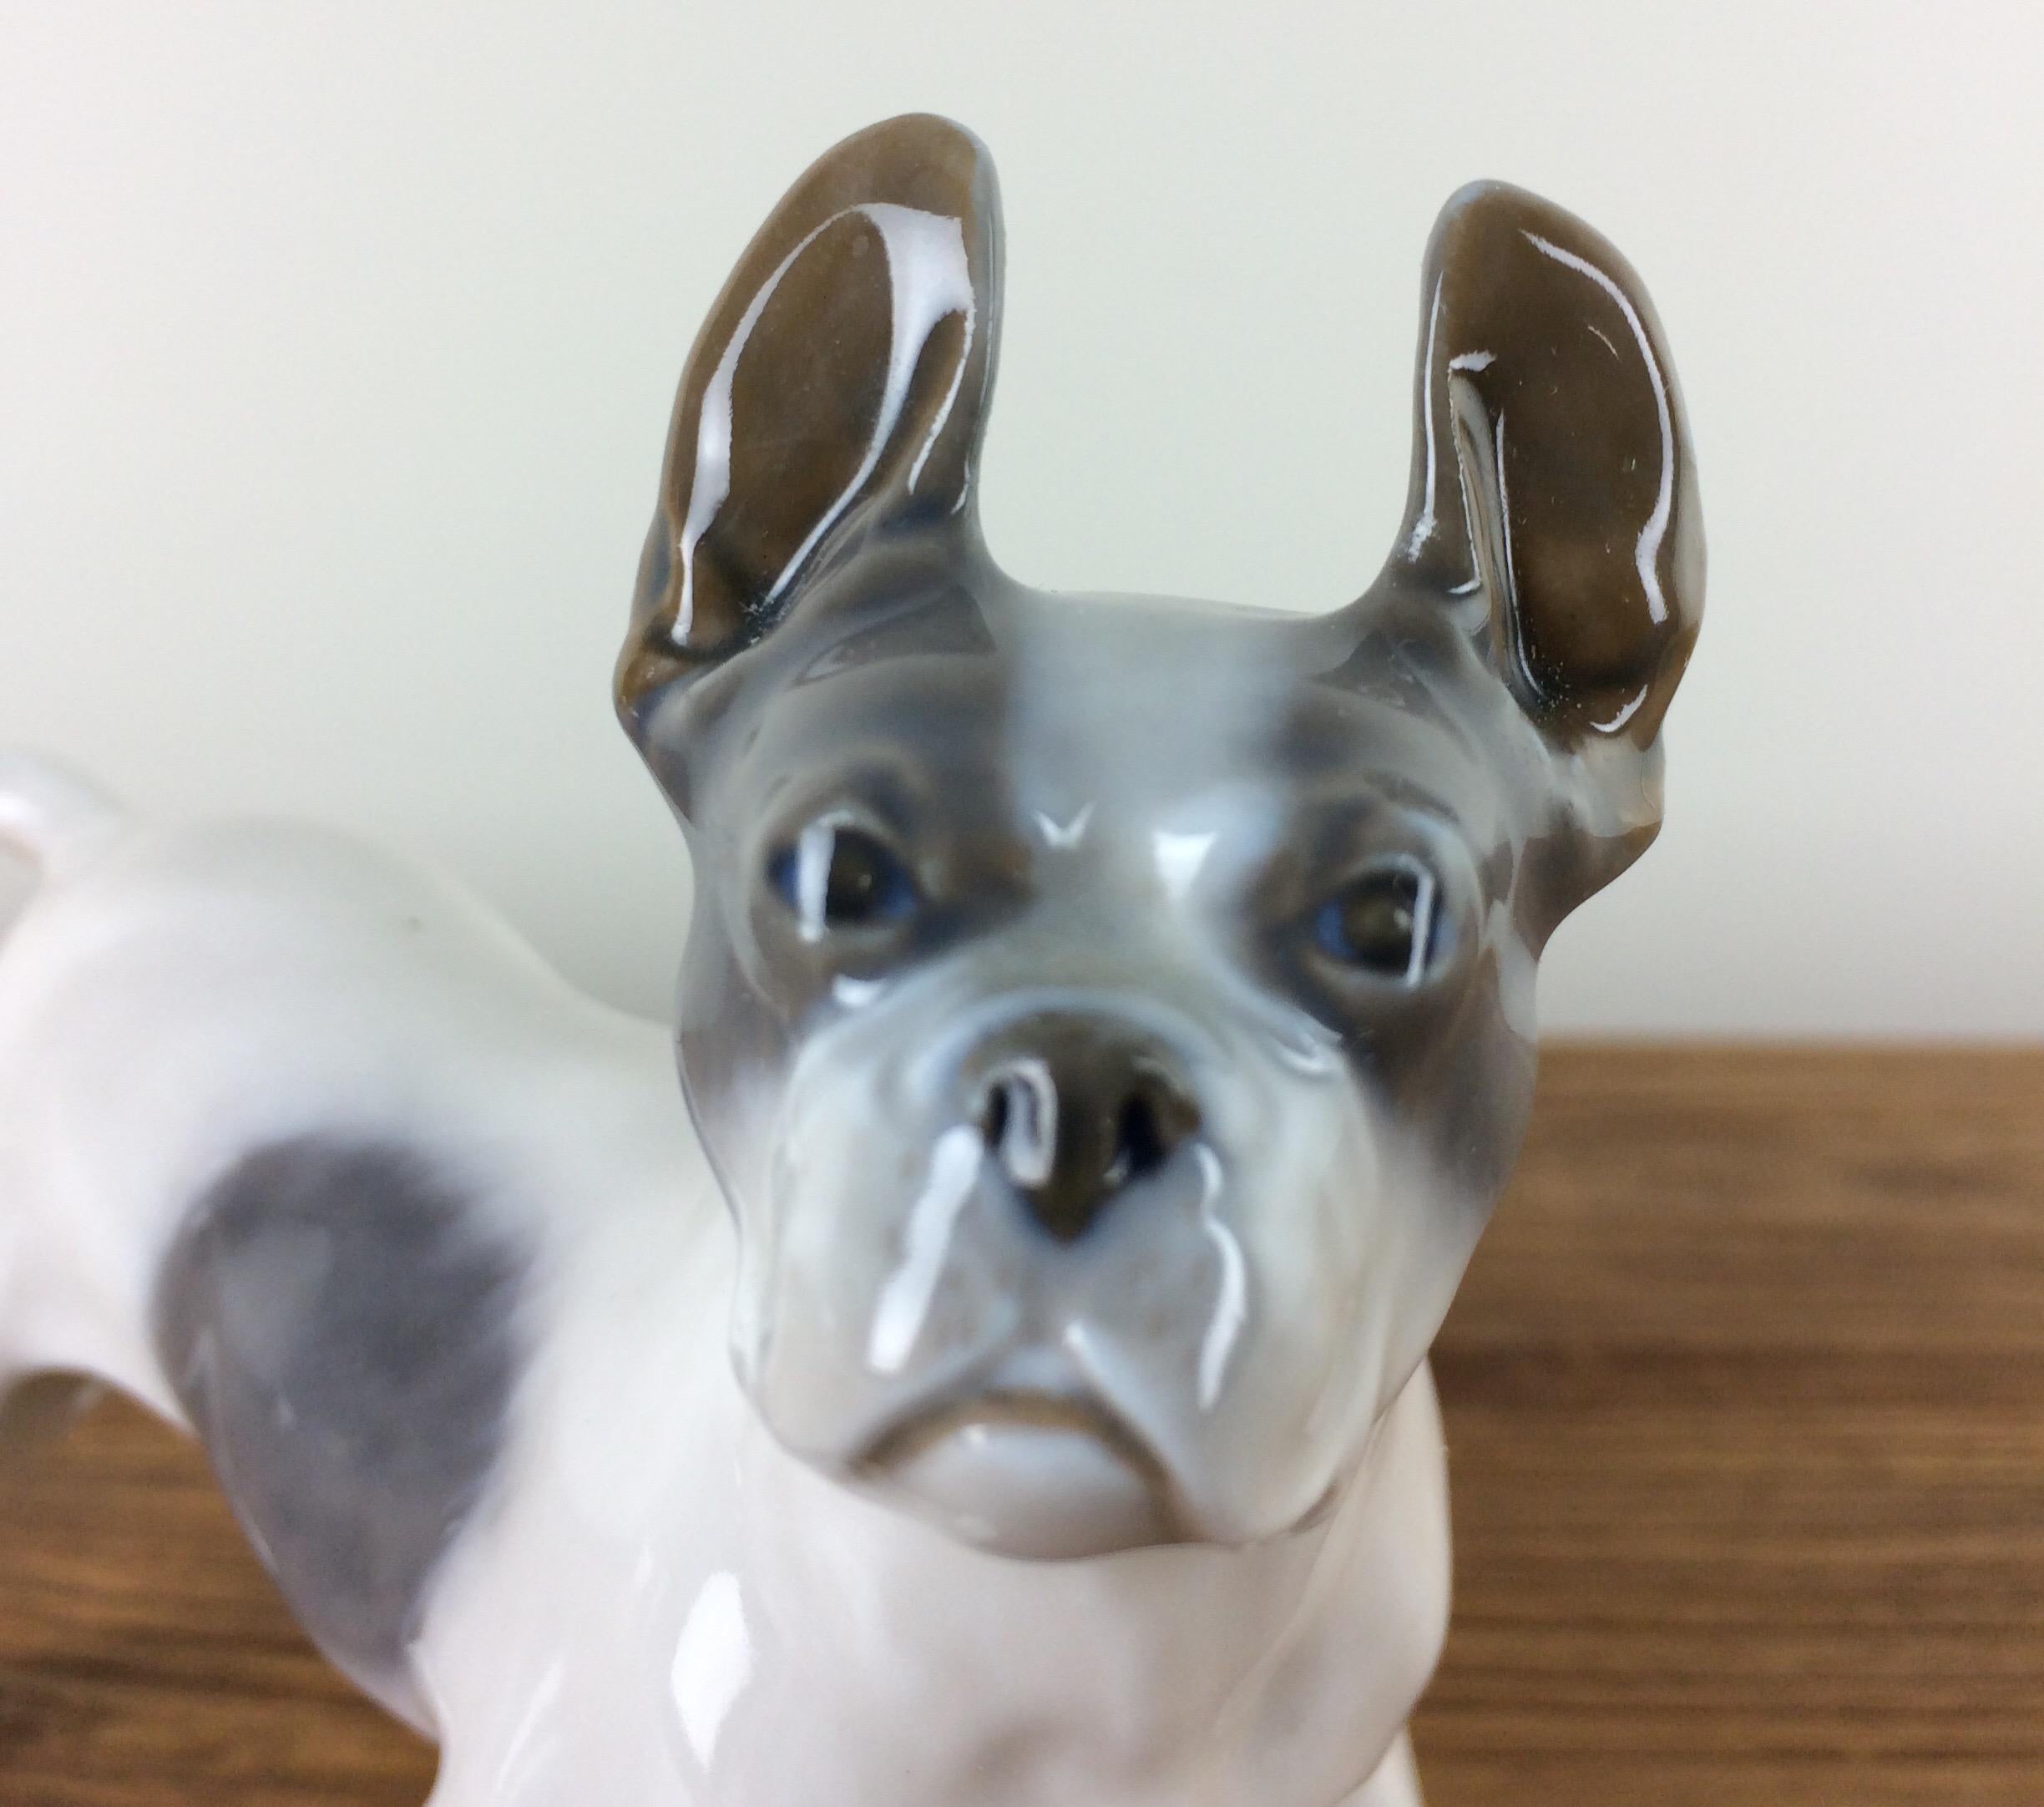 Royal Copenhagen porcelain bulldog from the Early 20th Century.
A male French Bulldog - Male Frenchie - Male Boston Terrier Dog. 
The Porcelain Dog has the Royal Copenhagen Crown and Denmark stamped in green with blue wave mark with the number 1457.